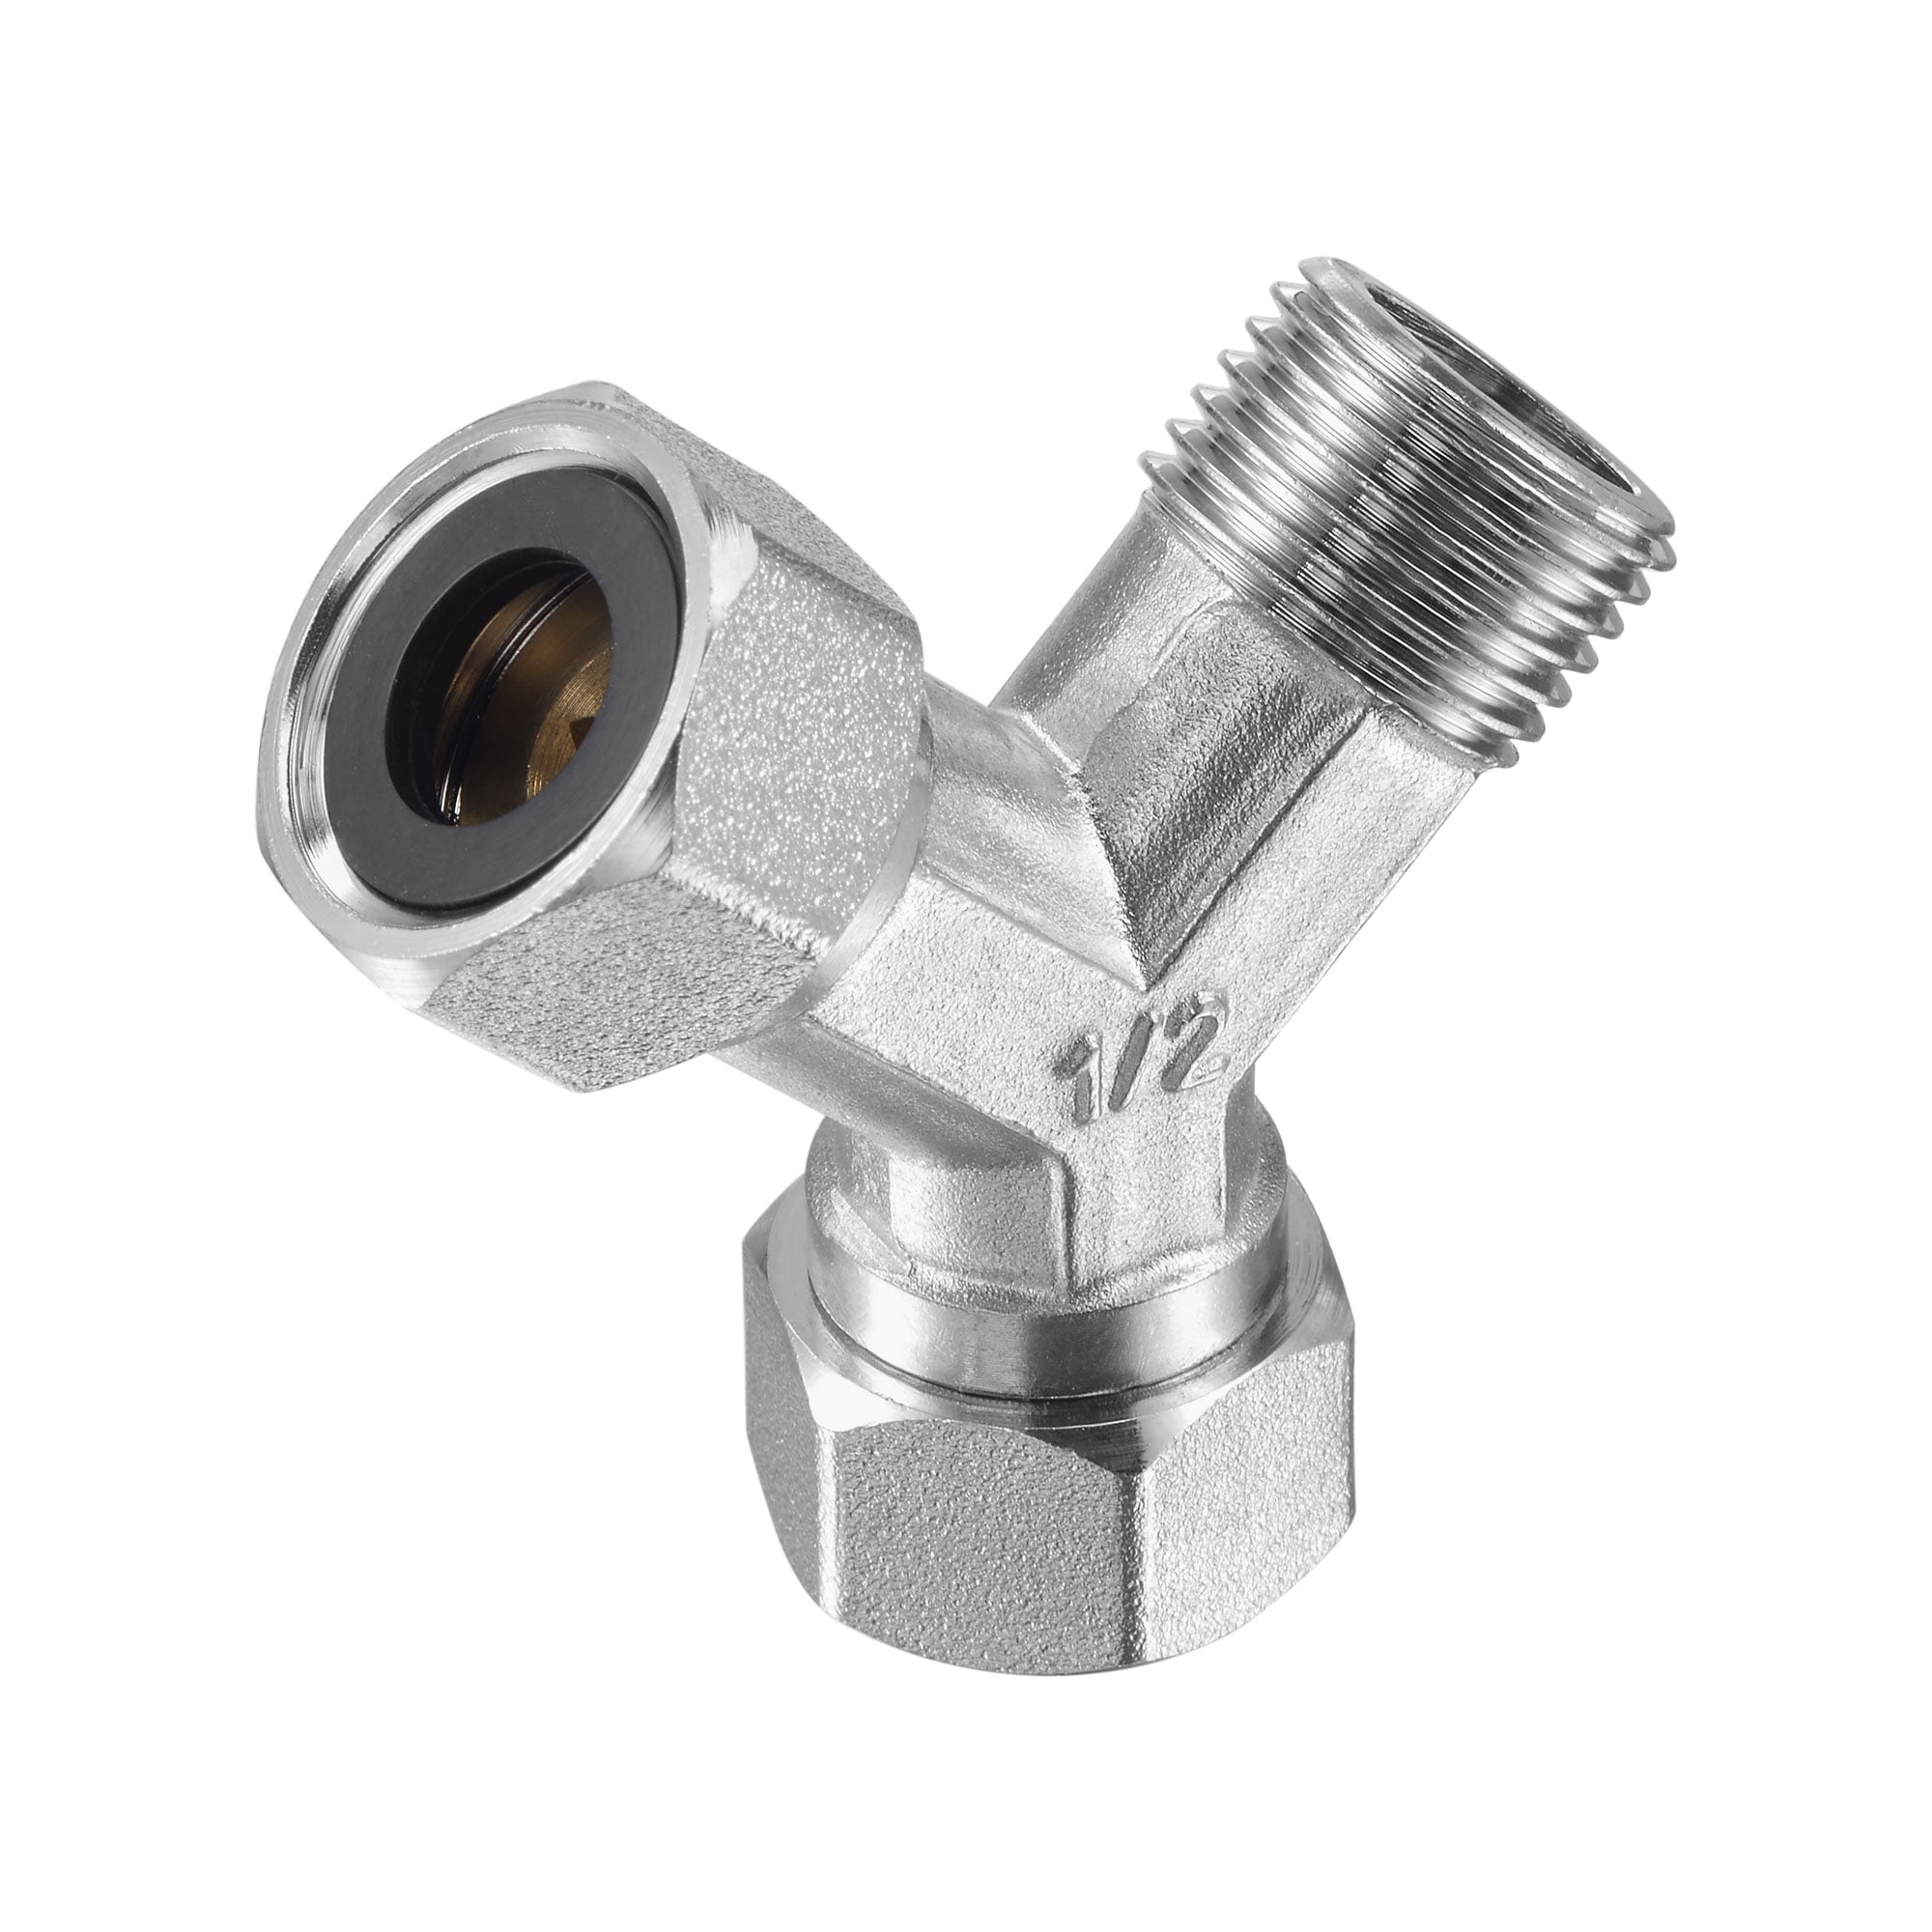 Stainless Steel 3 Way BSPT 1/8in Male Thread Hose Pipe Fitting Connector For Air